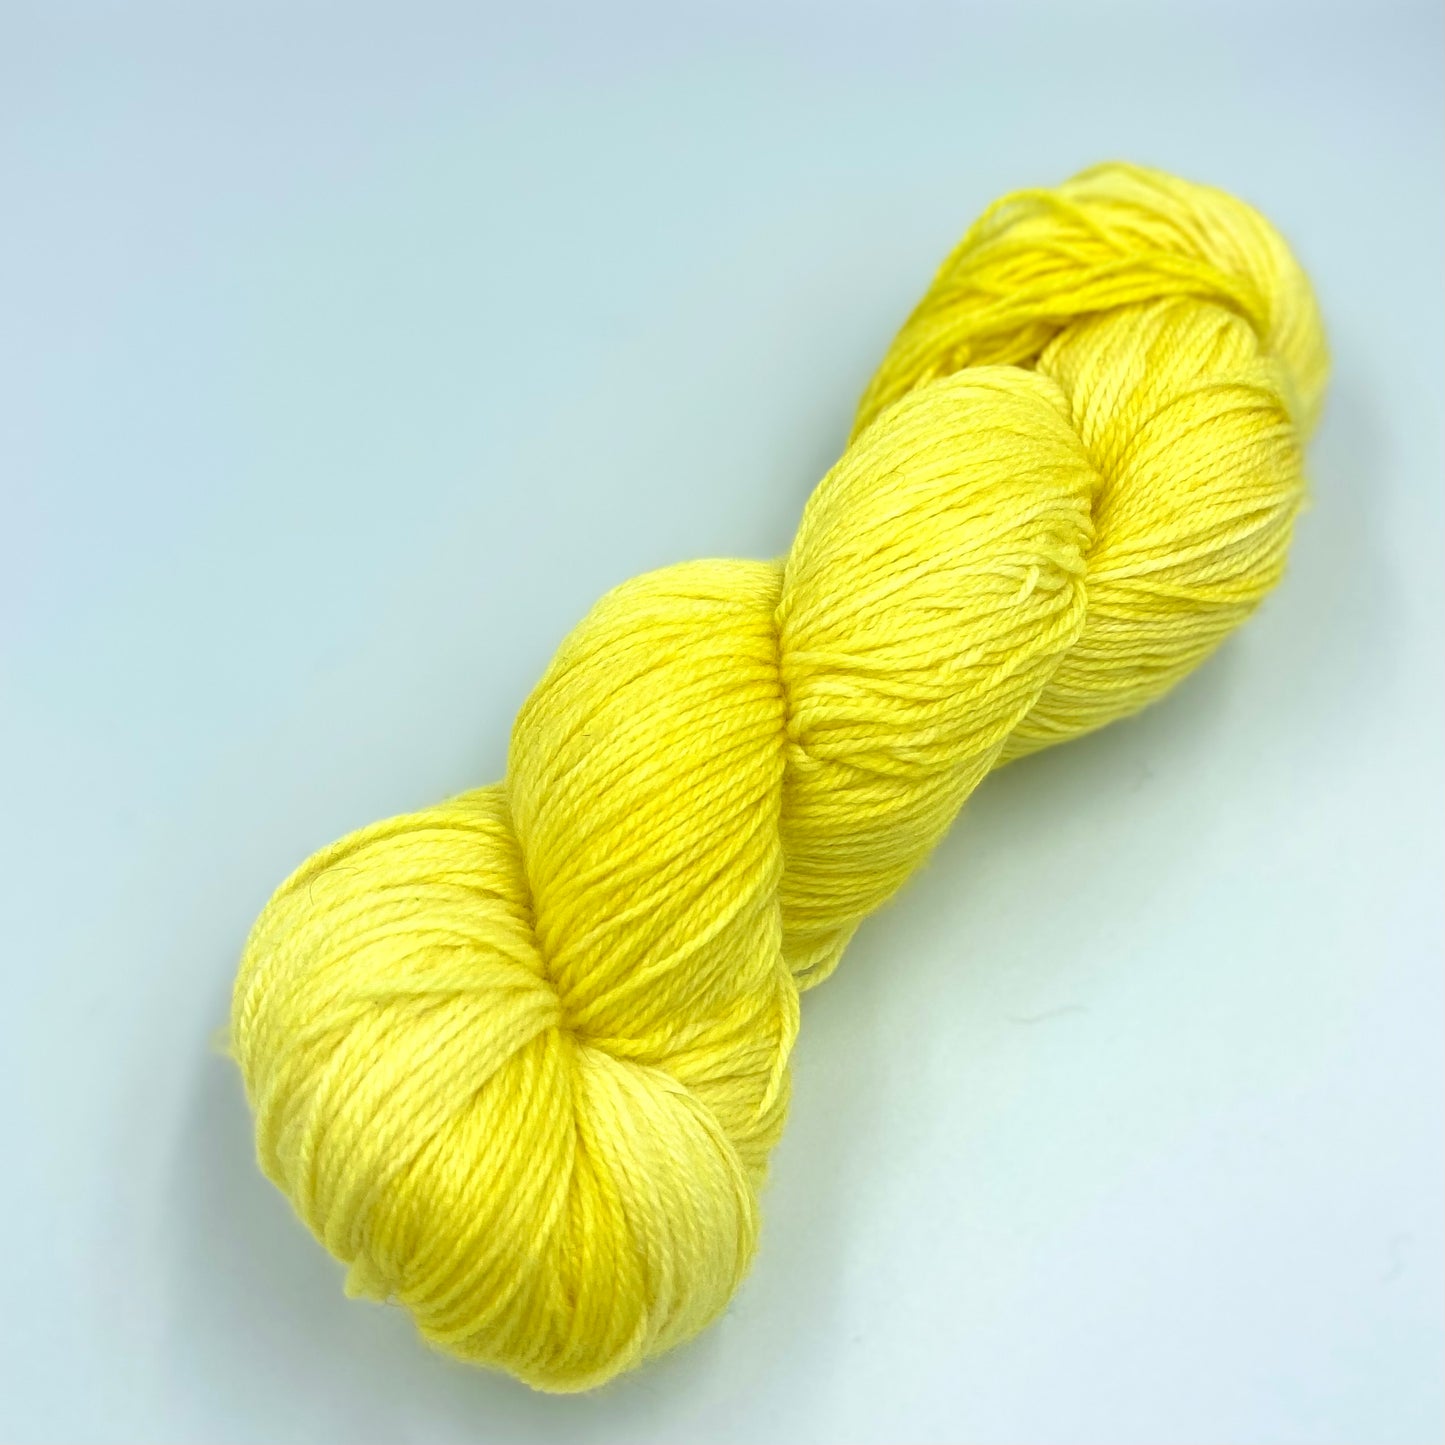 A skein of sparkly wool and nylon yarn hand dyed in the color yellow